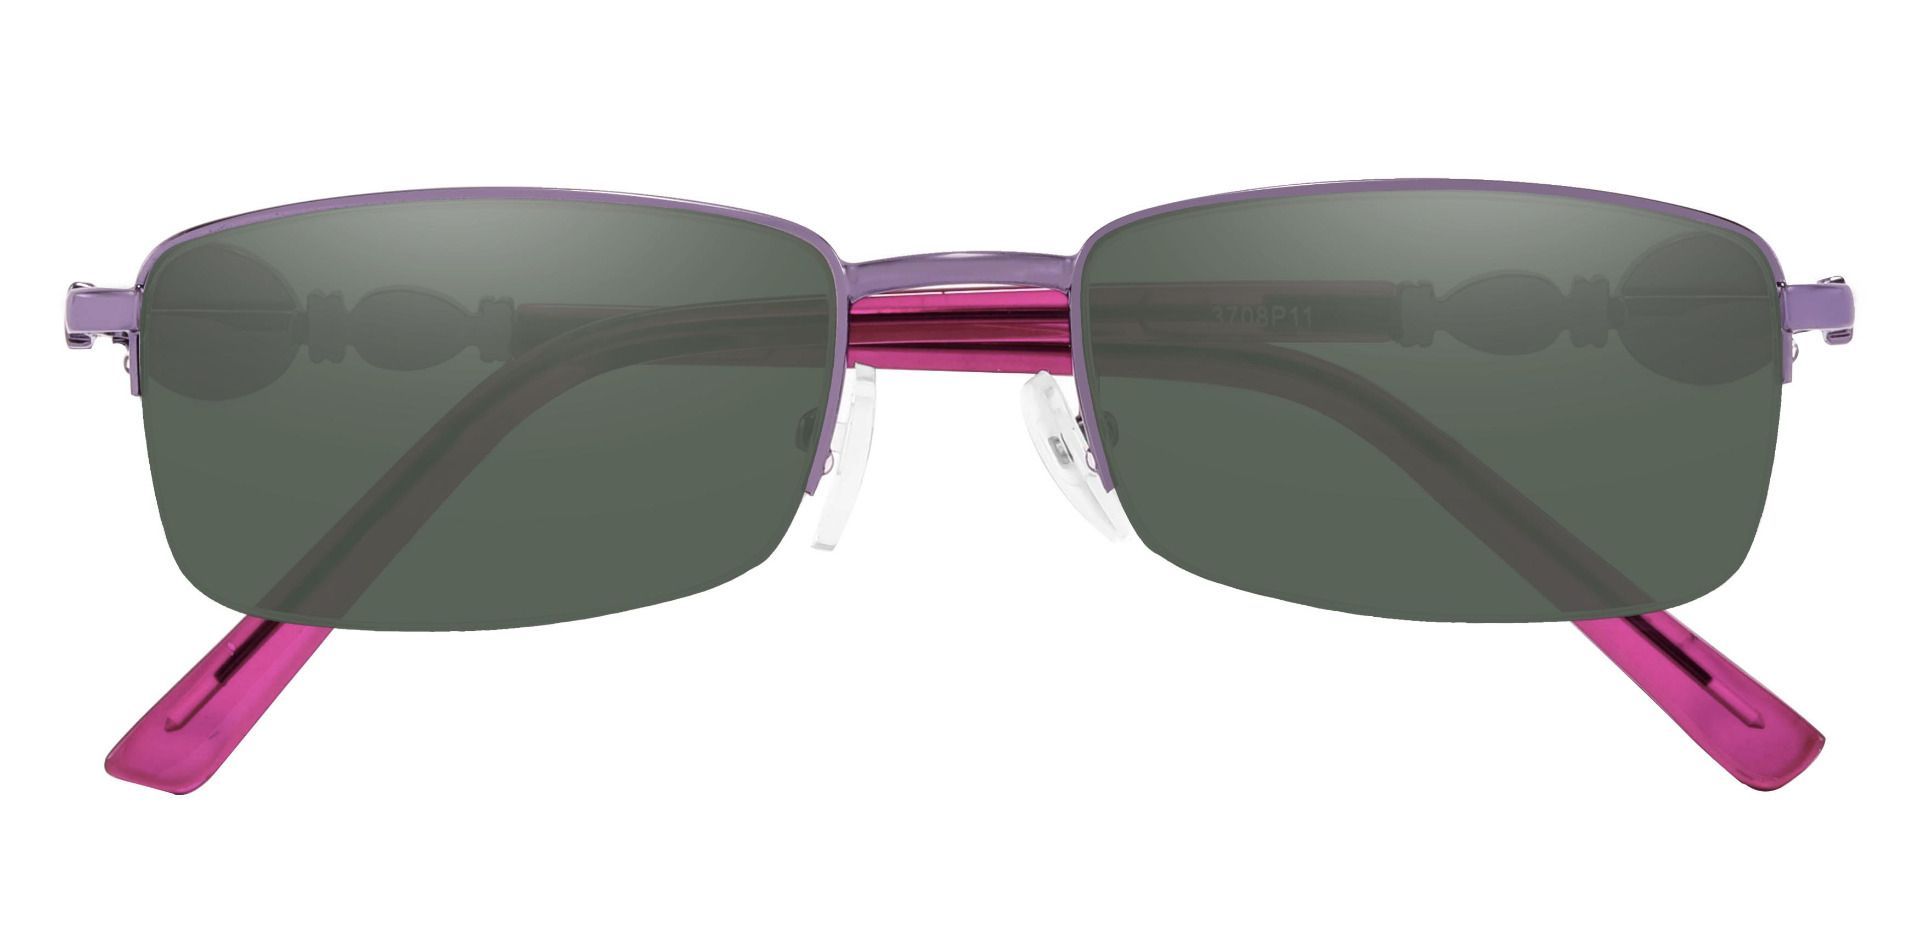 Crowley Rectangle Non-Rx Sunglasses - Purple Frame With Green Lenses